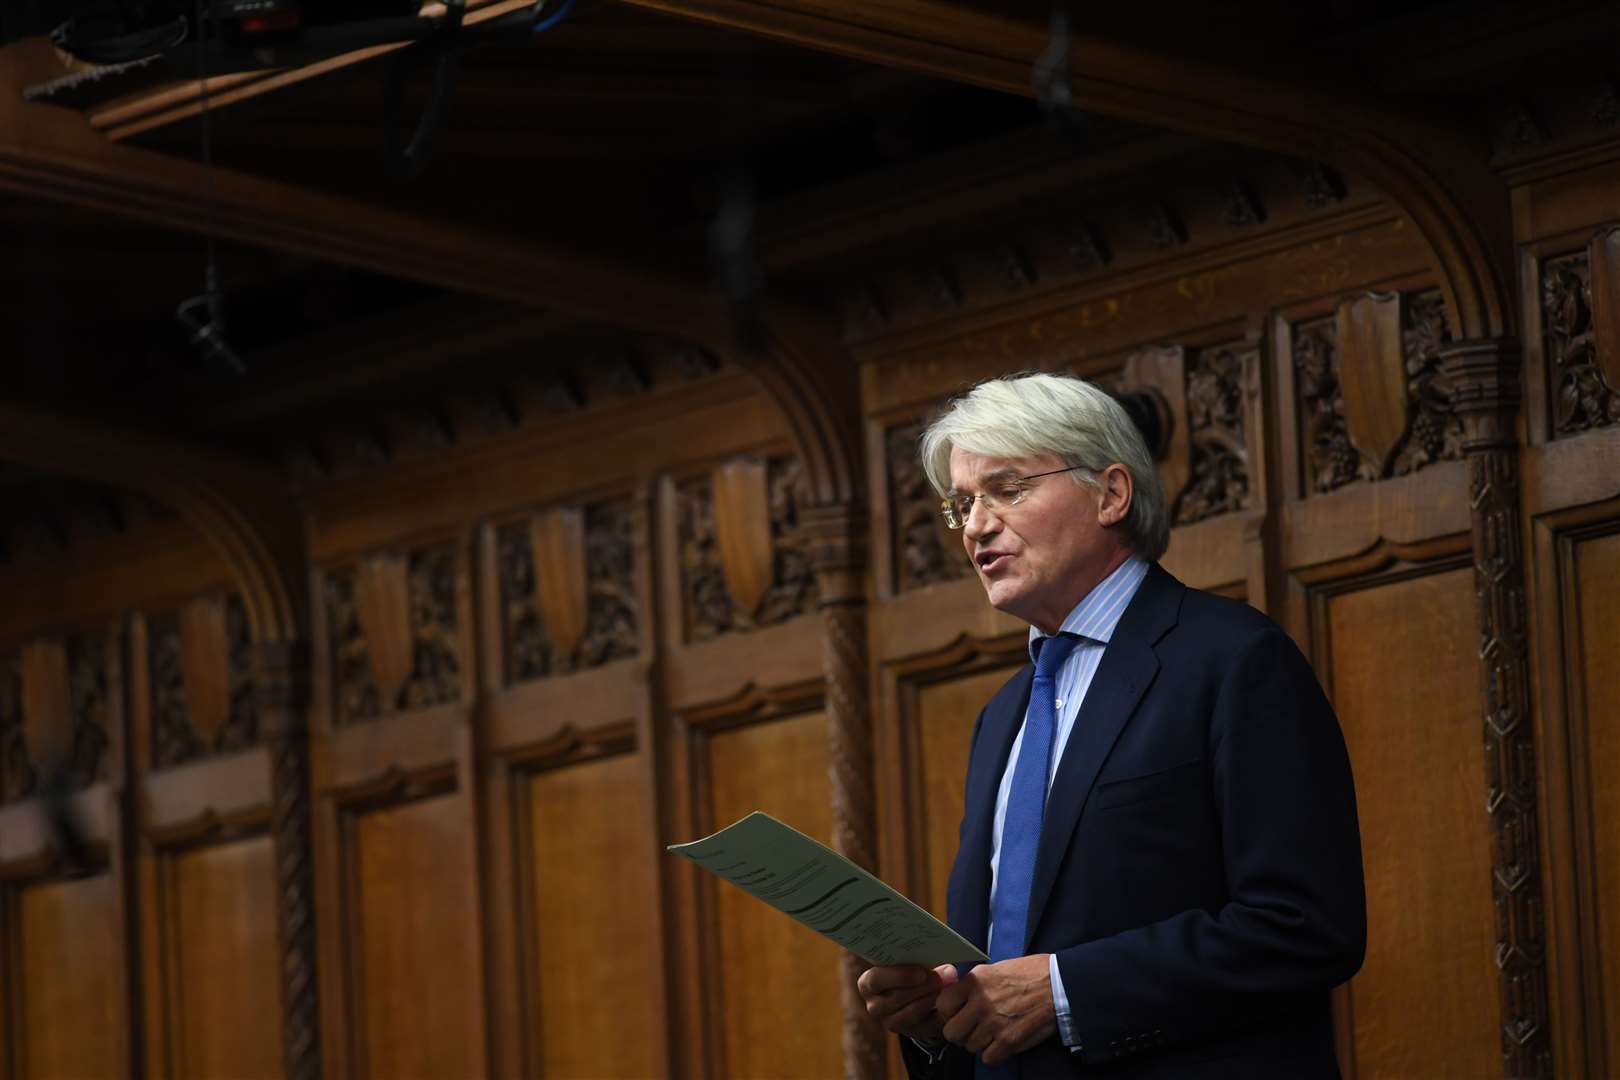 Andrew Mitchell warned that cutting the aid budget risks causing 100,000 otherwise preventable deaths (UK Parliament/Jessica Taylor/PA)